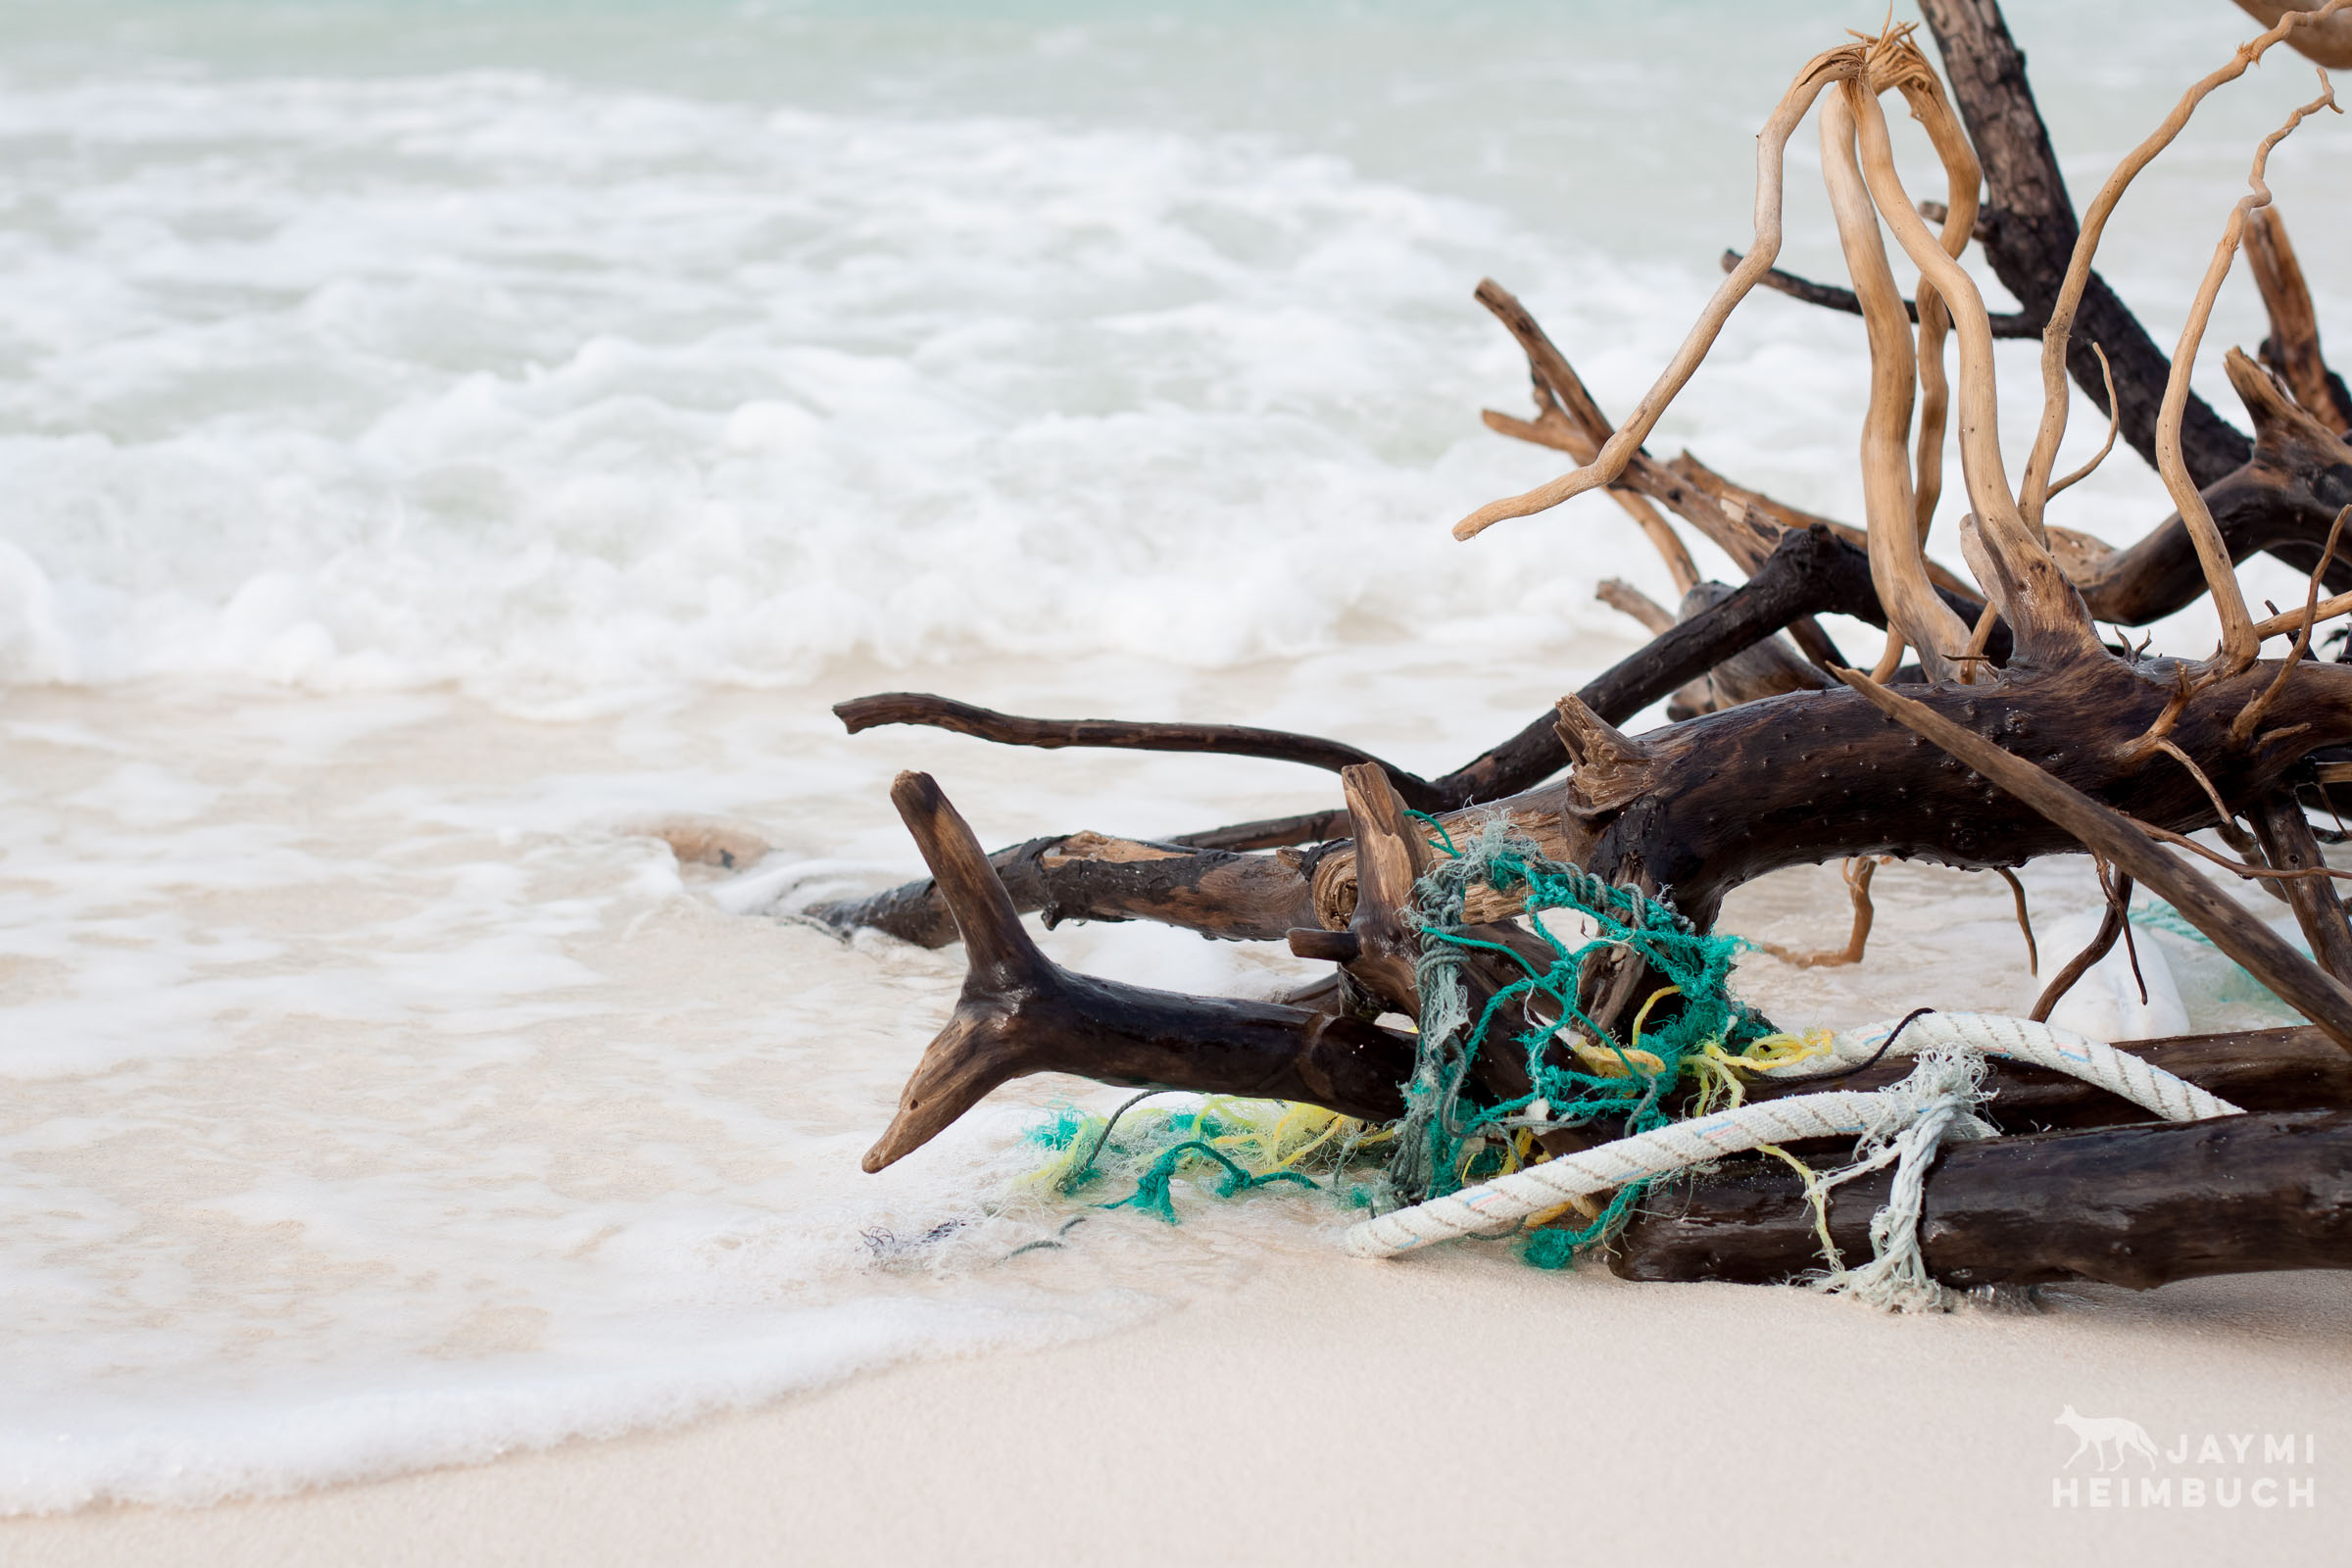 Discarded ropes are wrapped around driftwood on a beach